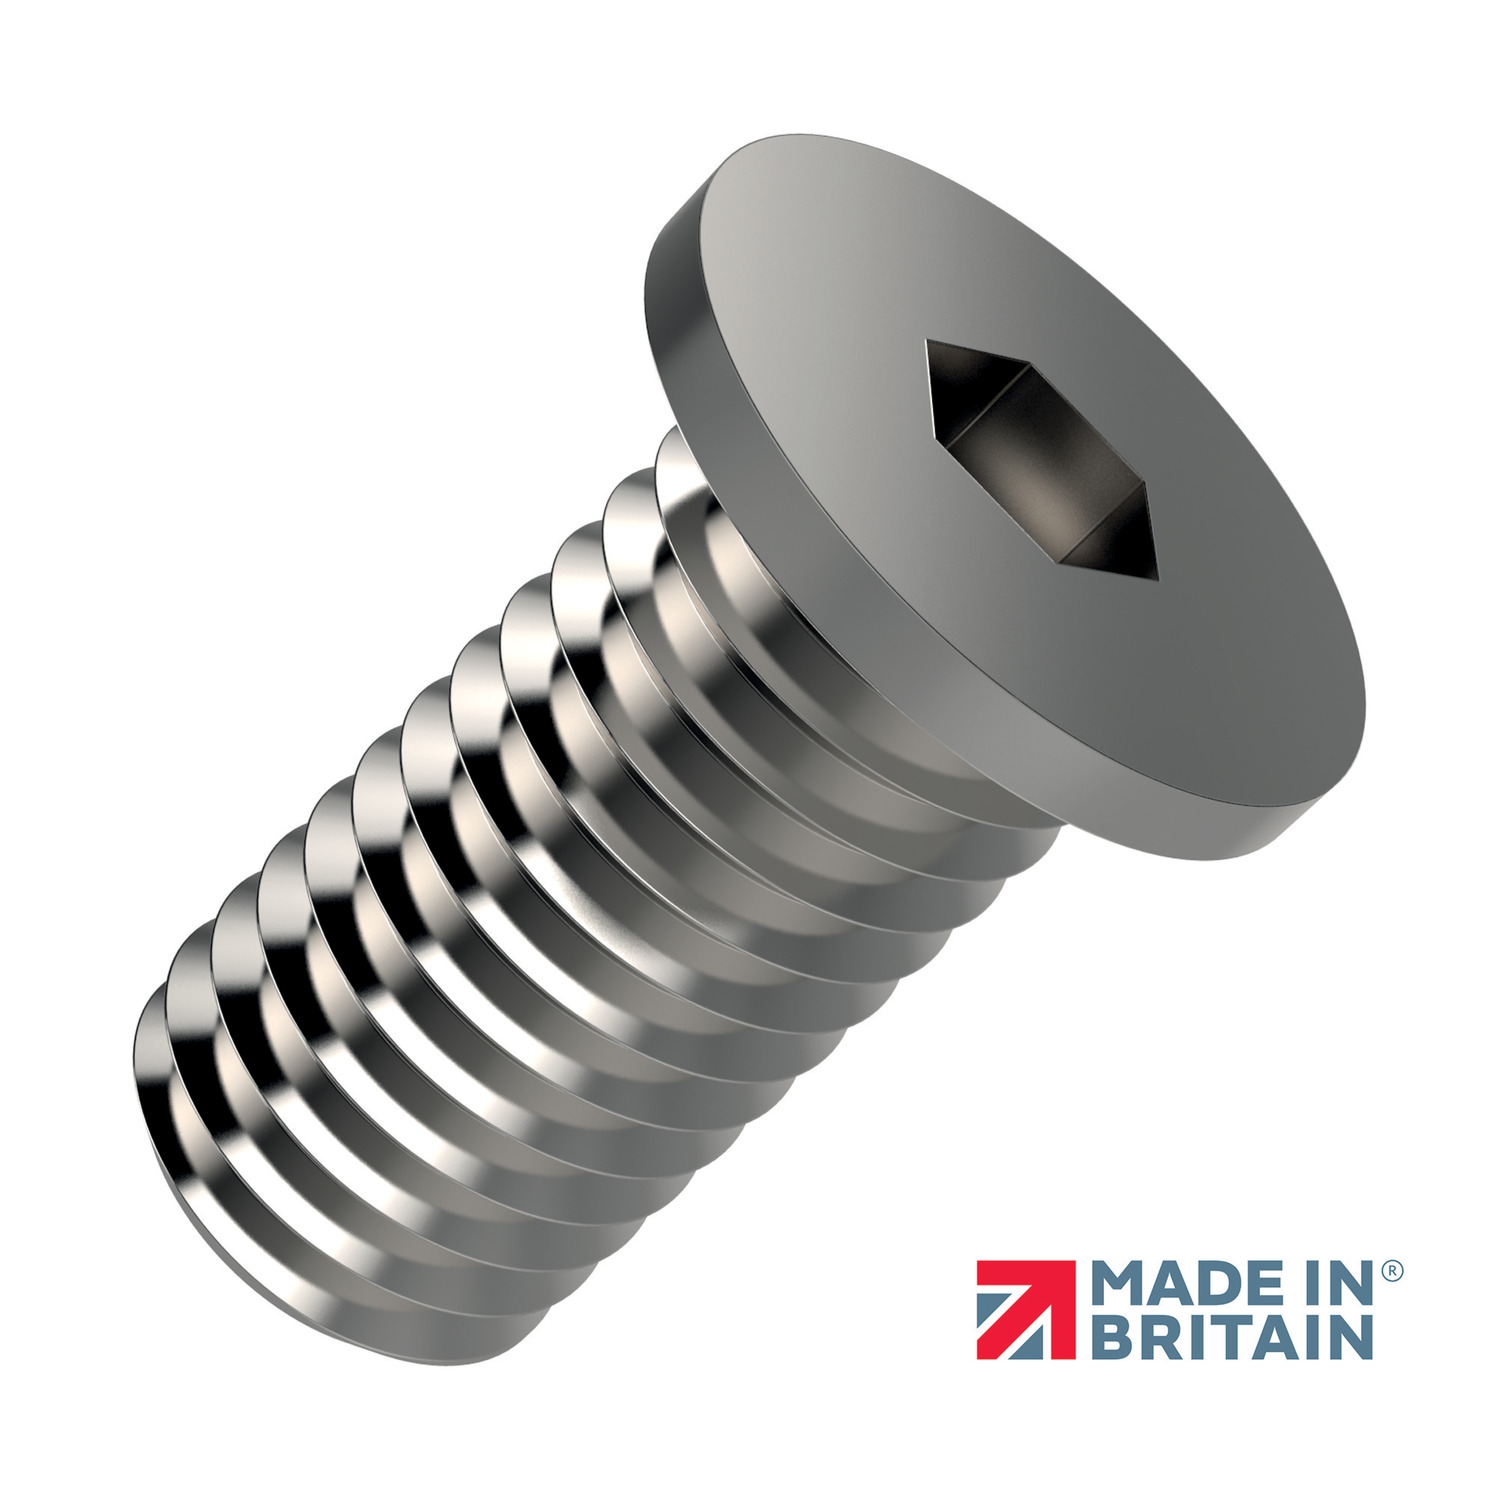 Extra Low Head Cap Screws Stainless Steel A2. Tensile strength ~ 400N/mm2(except for M2 ~ 220N/mm2).  Extra low head cap screws reduce the screw head height space. Also available in Stainless Steel A4 (P0207.A4), Titanium (P0207.Ti) and a blackened finish (P0207.B2 and P0207.B4)